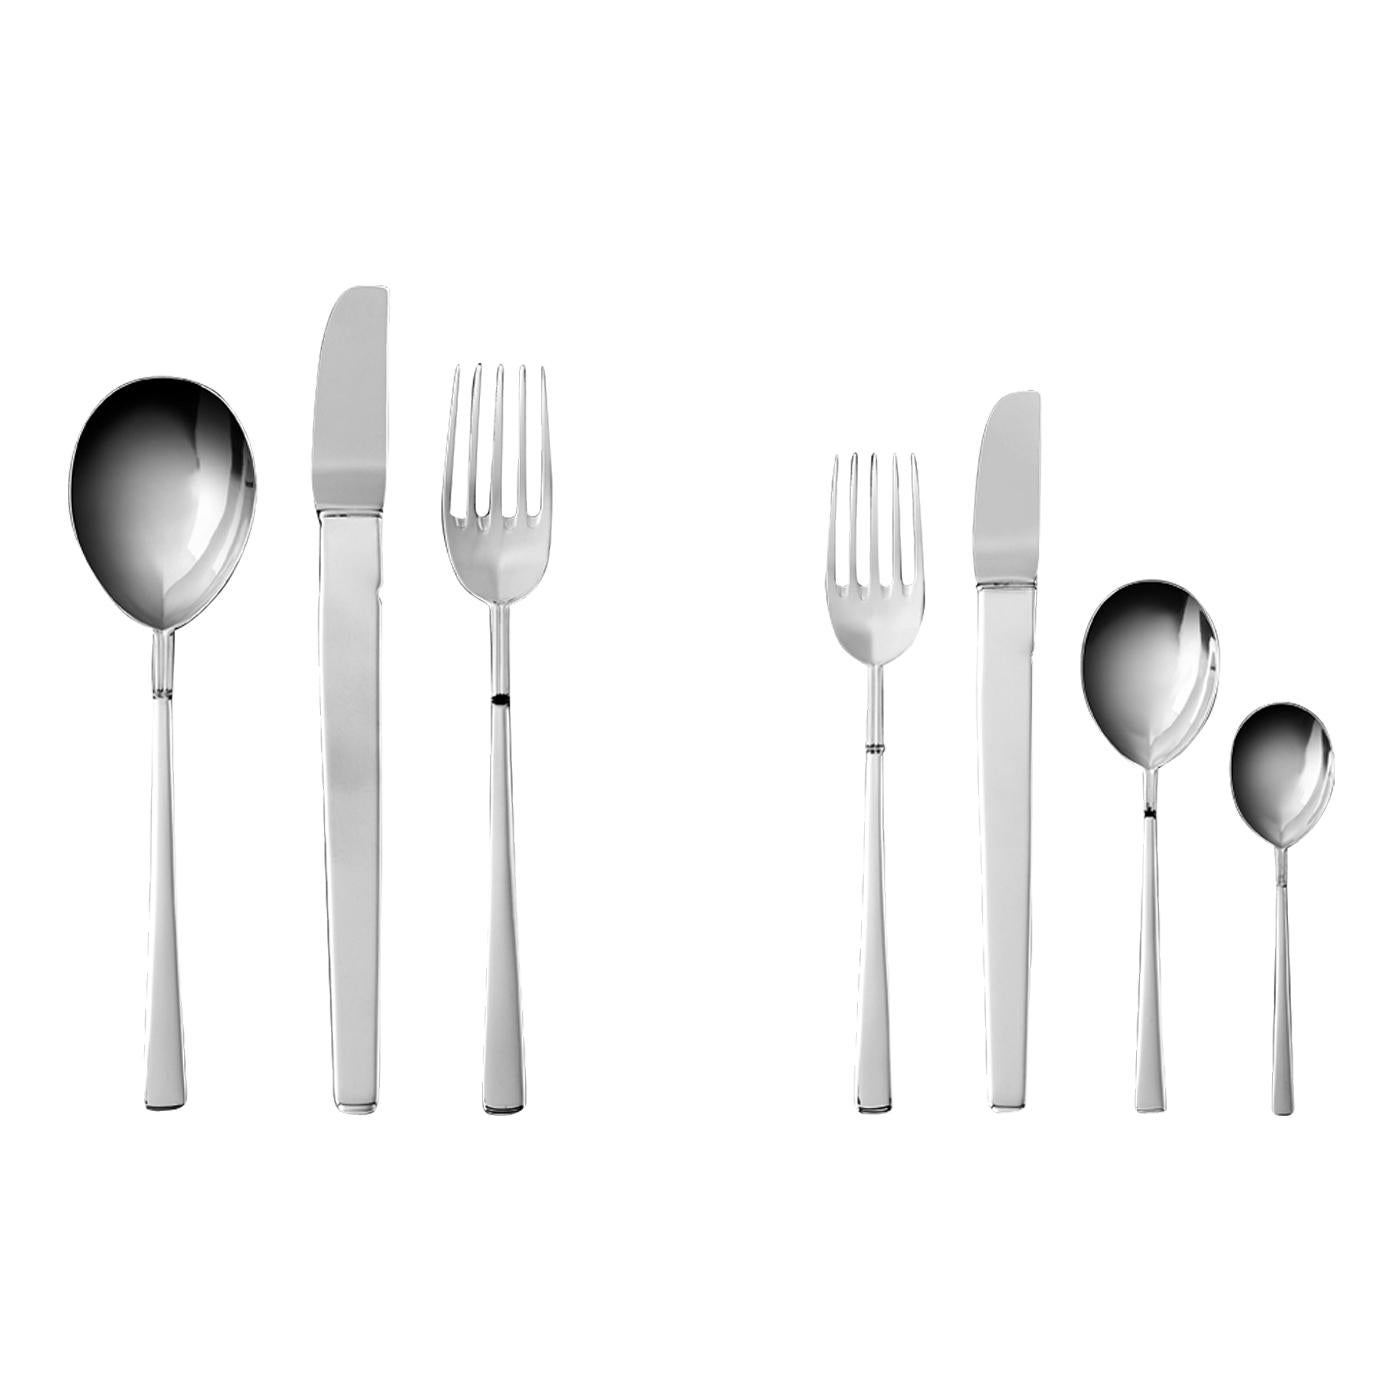 This exquisite cutlery set will bring elegancy and luxury to any dining table, whether in the home or in a restaurant environment. This set consists of seven pieces, all crafted completely in 925 silver, and make up a complete set for one. In the